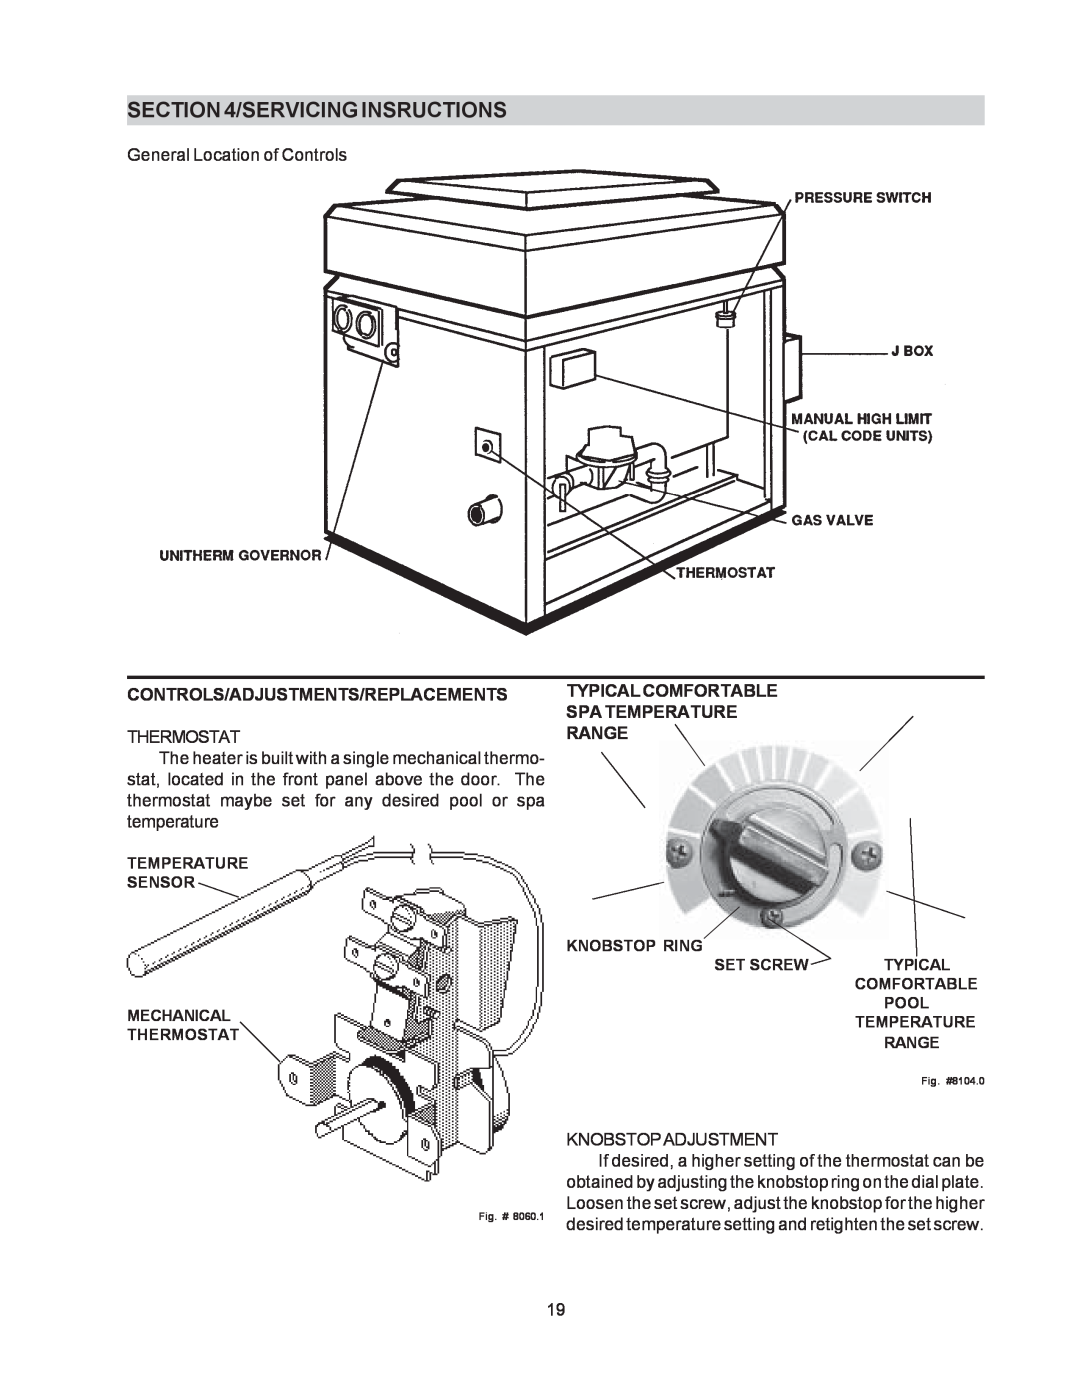 Raypak 514-824 manual Servicing Insructions, Controls/Adjustments/Replacements, Typical Comfortable Spa Temperature Range 